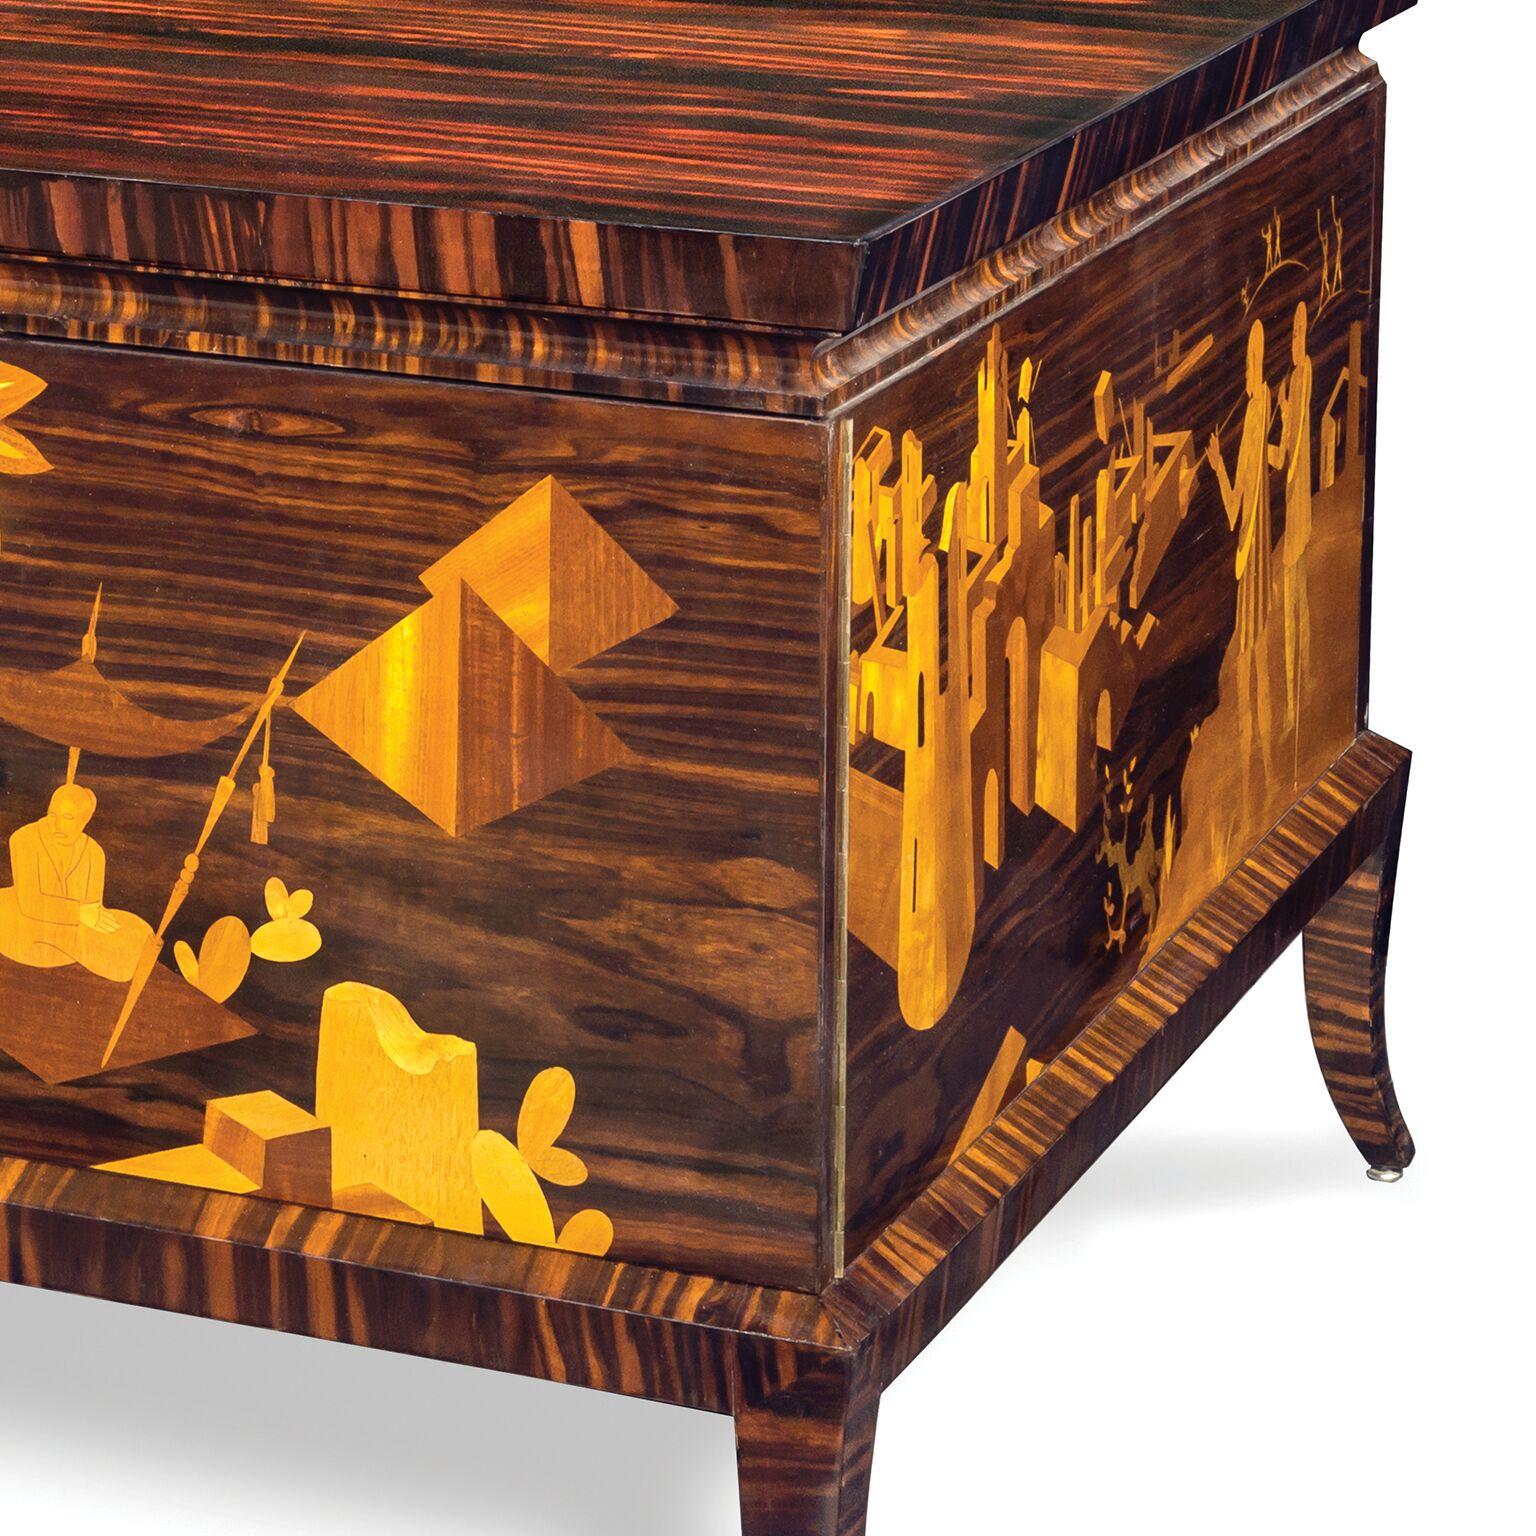 Magnificent Art Deco Palisander and Satinwood Marquetry Desk, Belgian, 1930 In Good Condition For Sale In South Yarra, AU